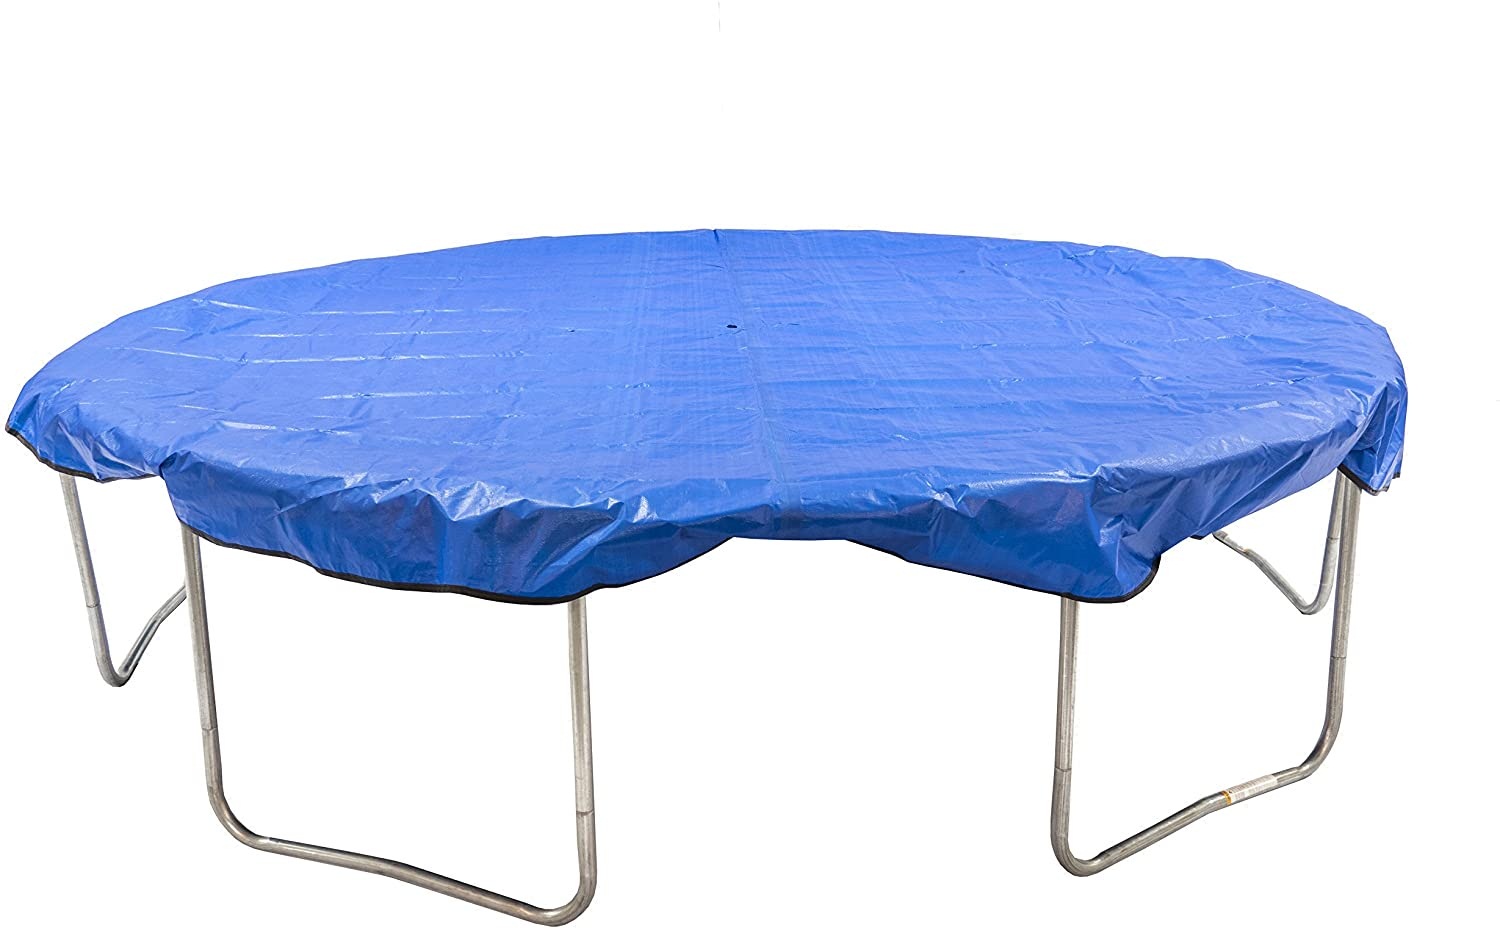 JumpKing 15 Foot Trampoline Weather Cover Blue